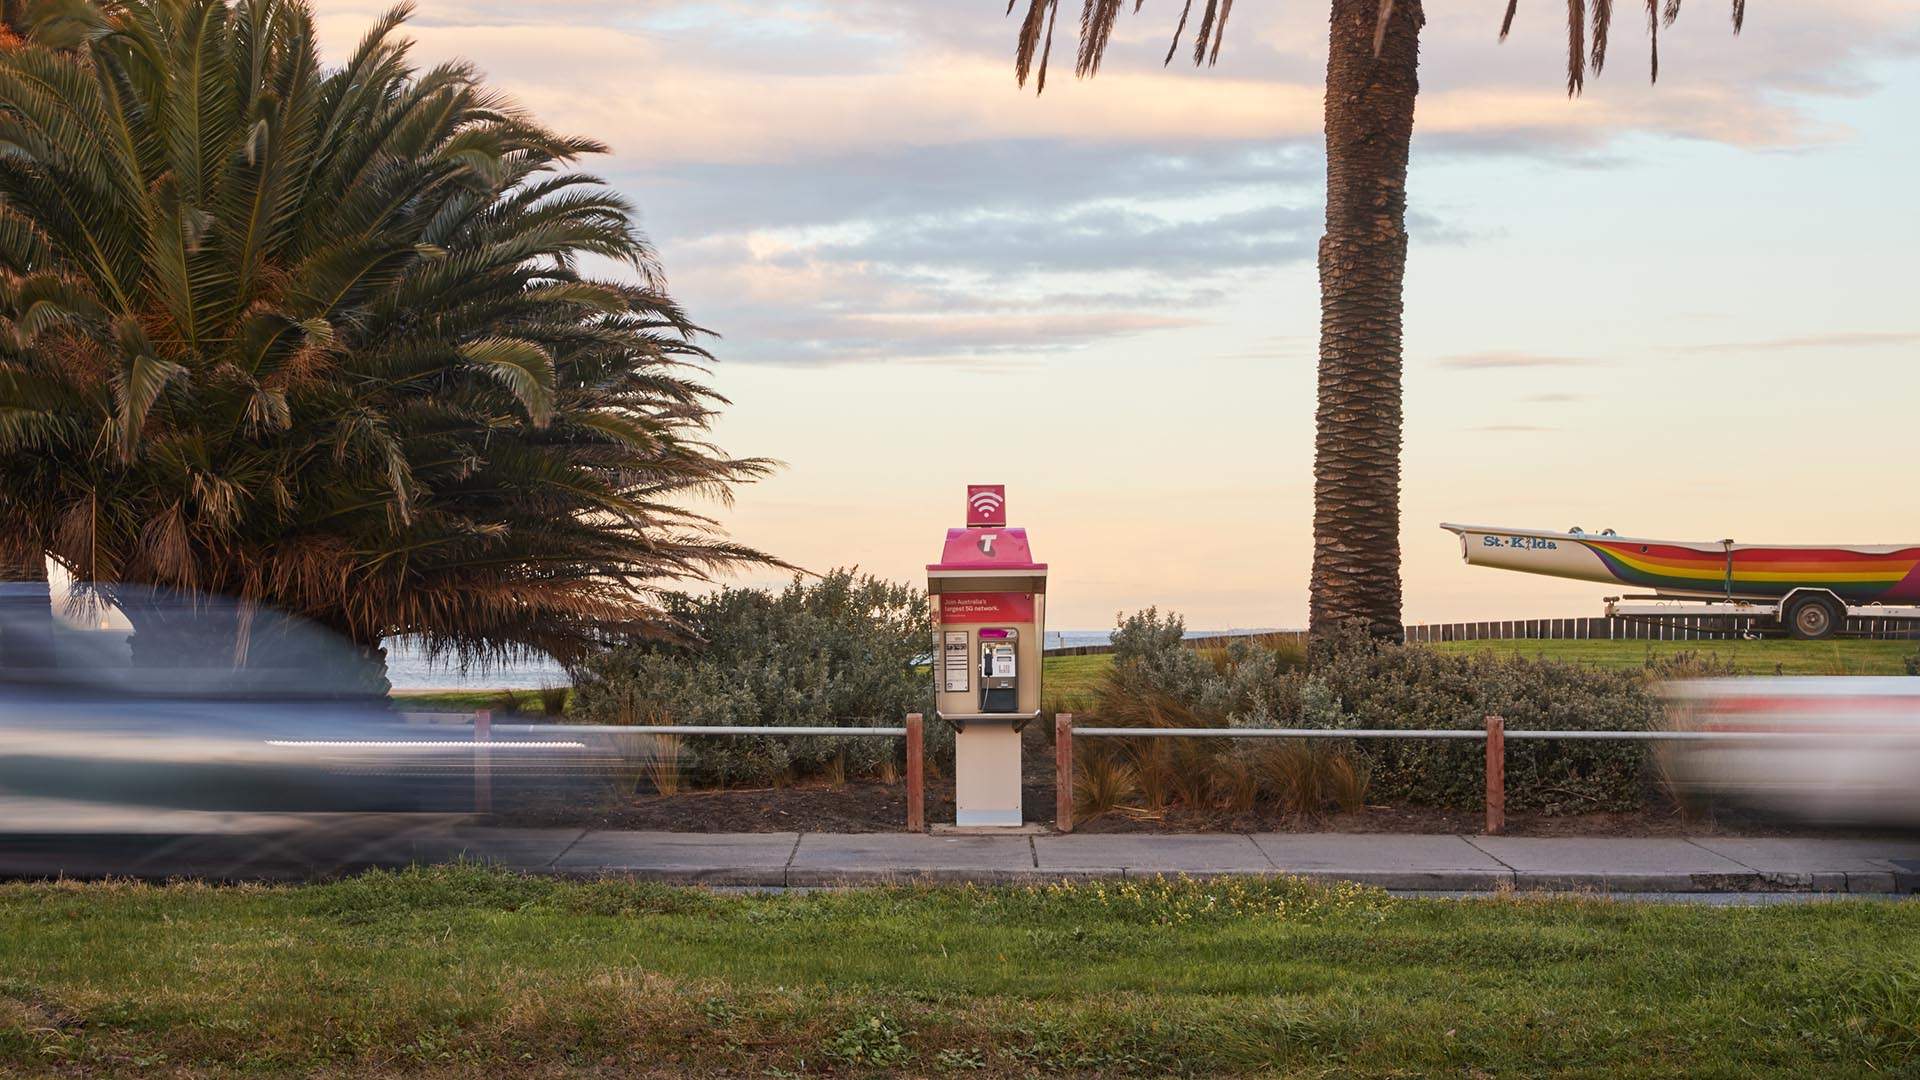 Telstra Is Rolling Out Free Wifi Across Its Payphones, Starting Immediately at Around 3000 Booths 